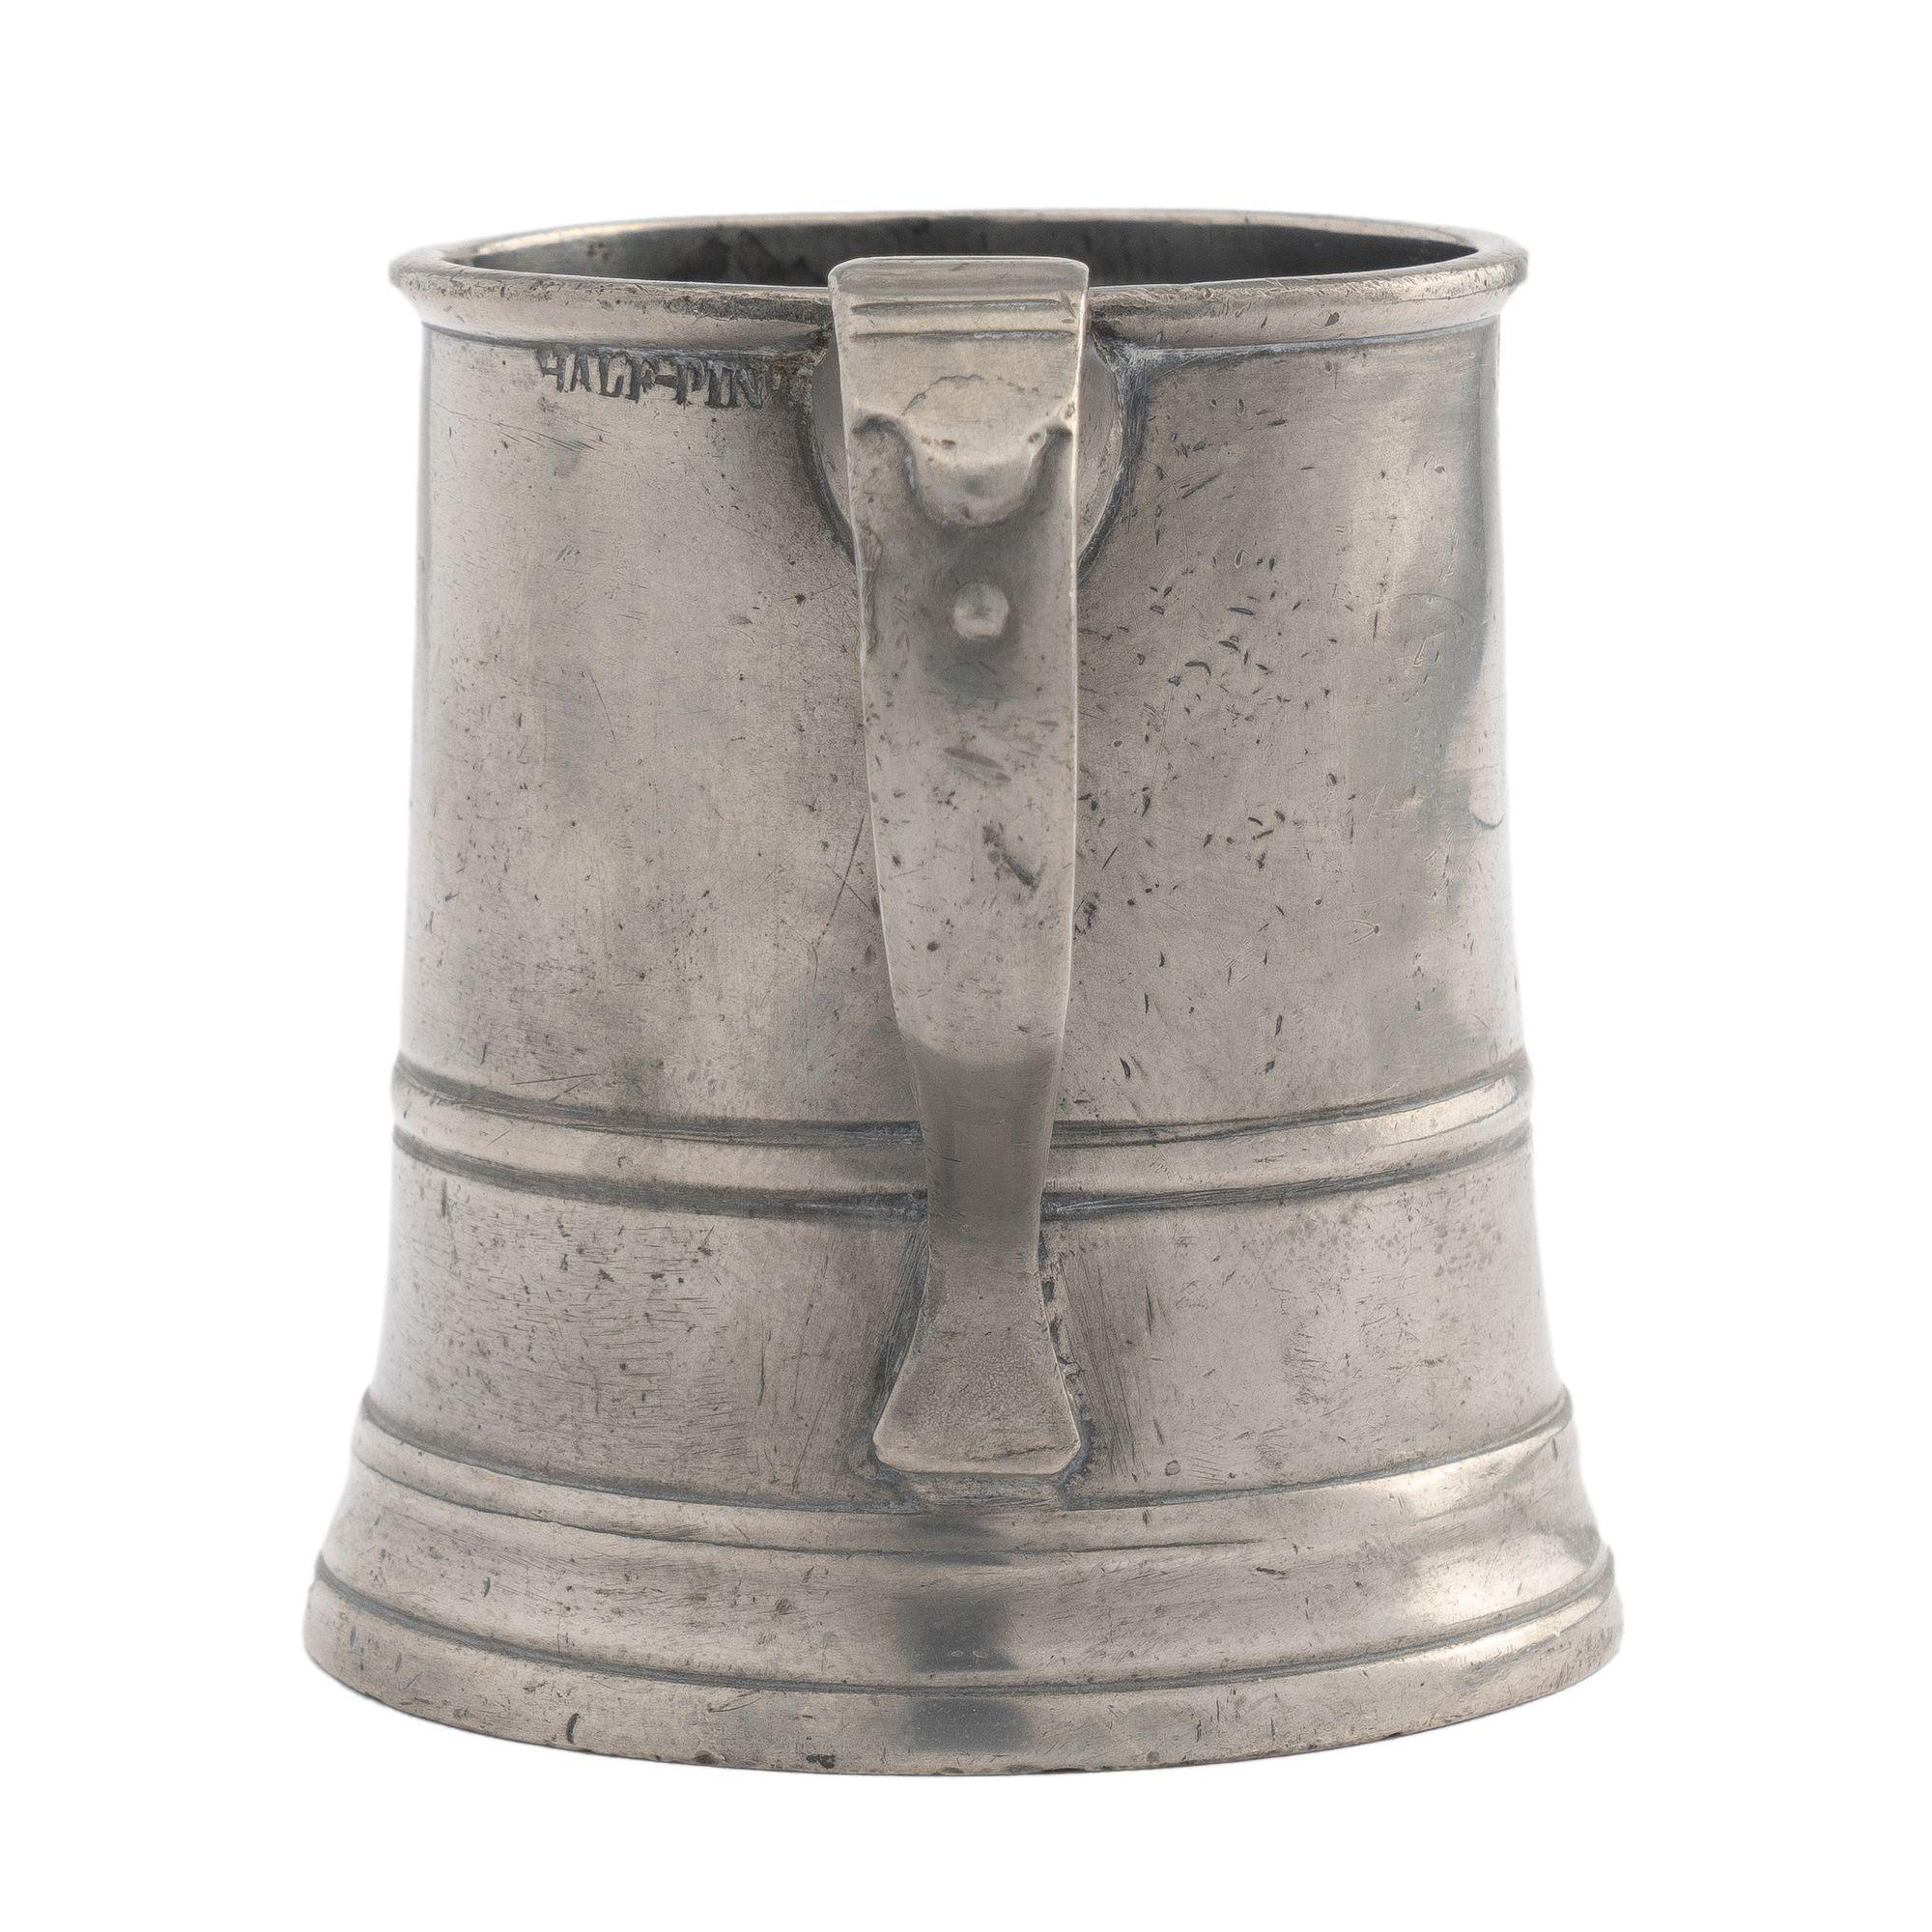 English pewter Half Pint mug, c. 1800's In Good Condition For Sale In Kenilworth, IL